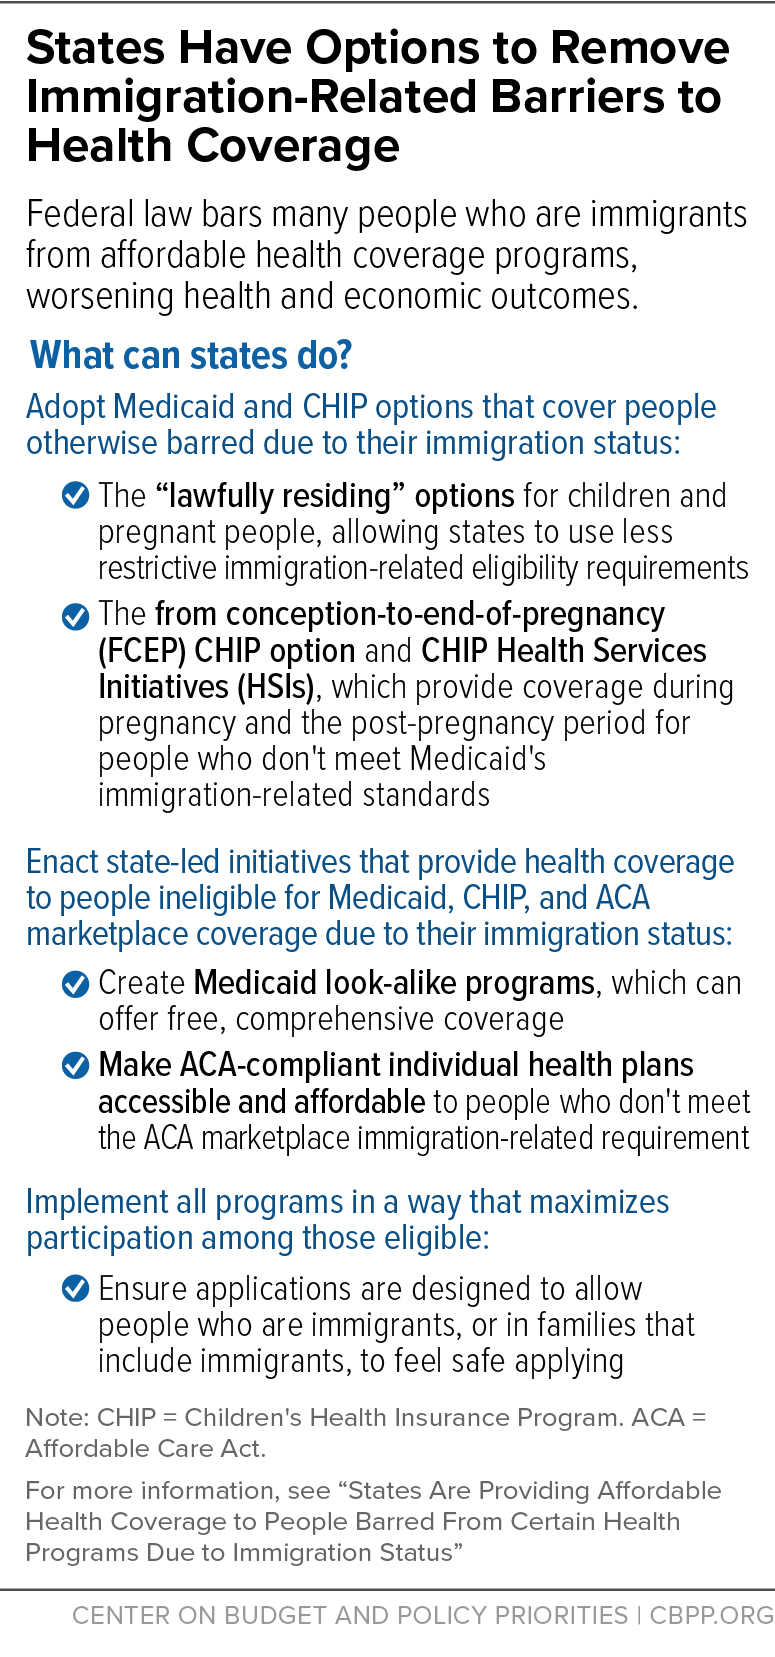 States Have Options to Remove Barriers to Immigration-Related Health Coverage 